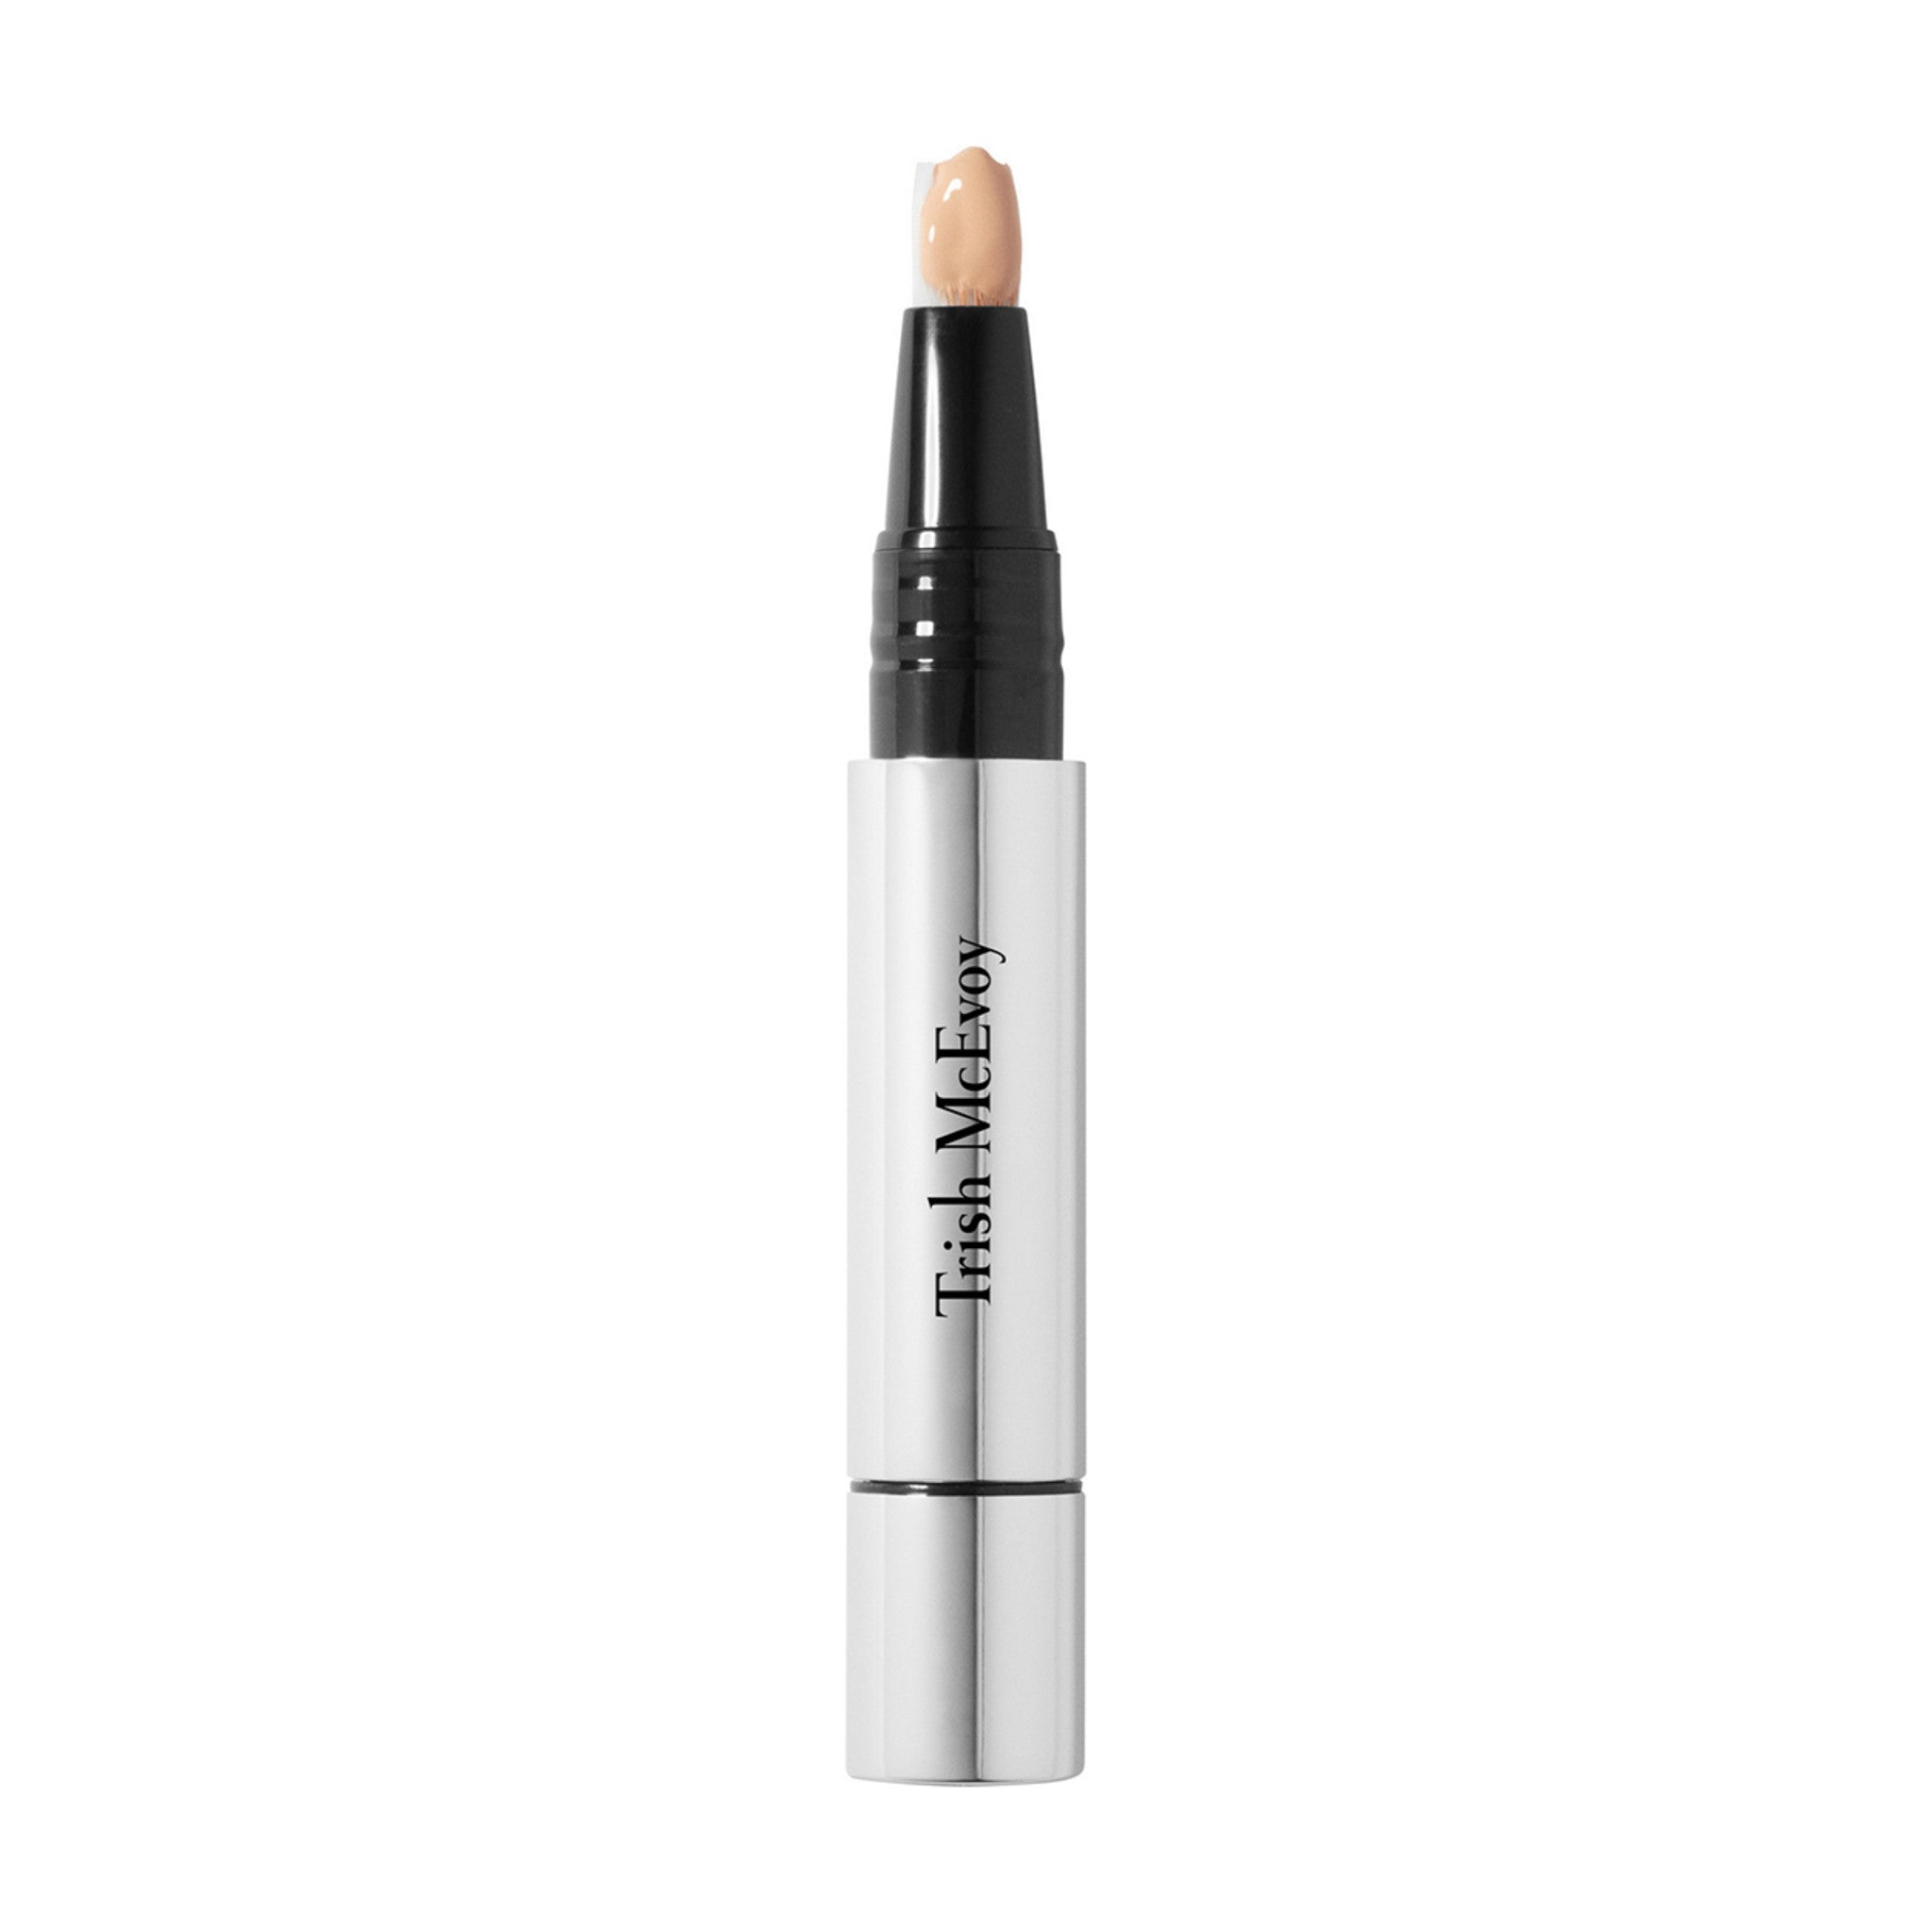 Trish McEvoy Correct and Brighten Shadow Eraser Color/Shade variant: 1.5 main image. This product is for light cool neutral complexions